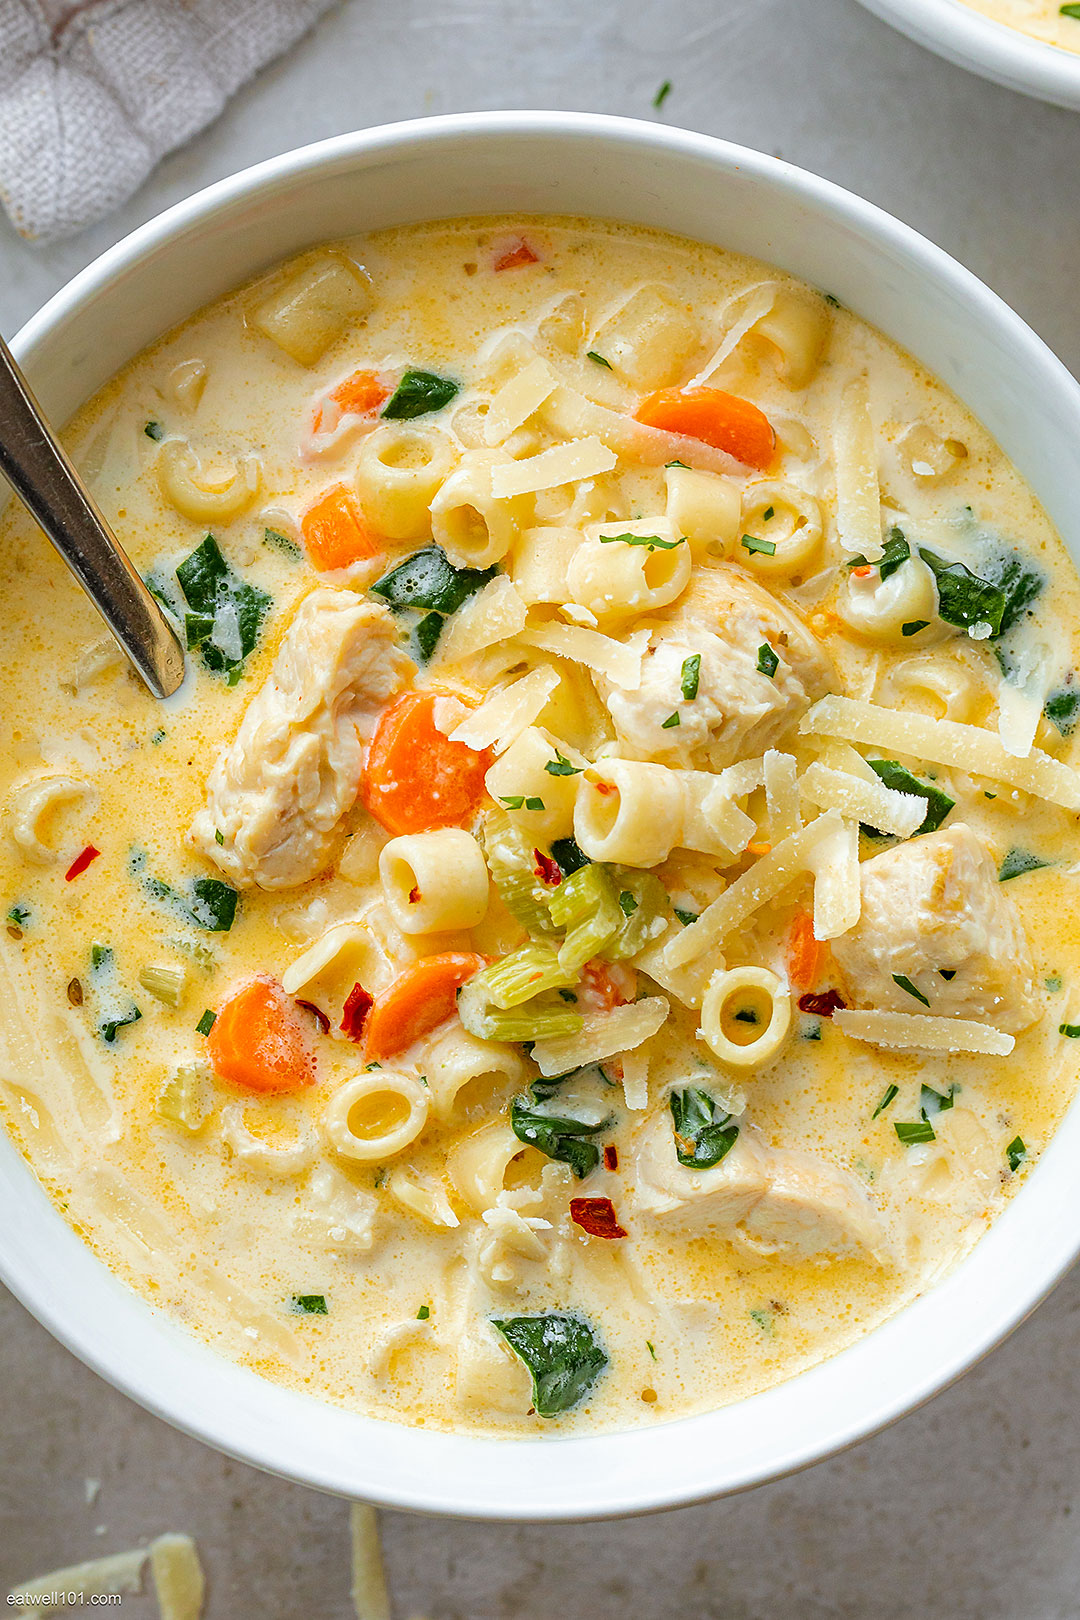 https://www.eatwell101.com/wp-content/uploads/2020/02/Creamy-Chicken-Soup-with-Pasta-and-Spinach.jpg